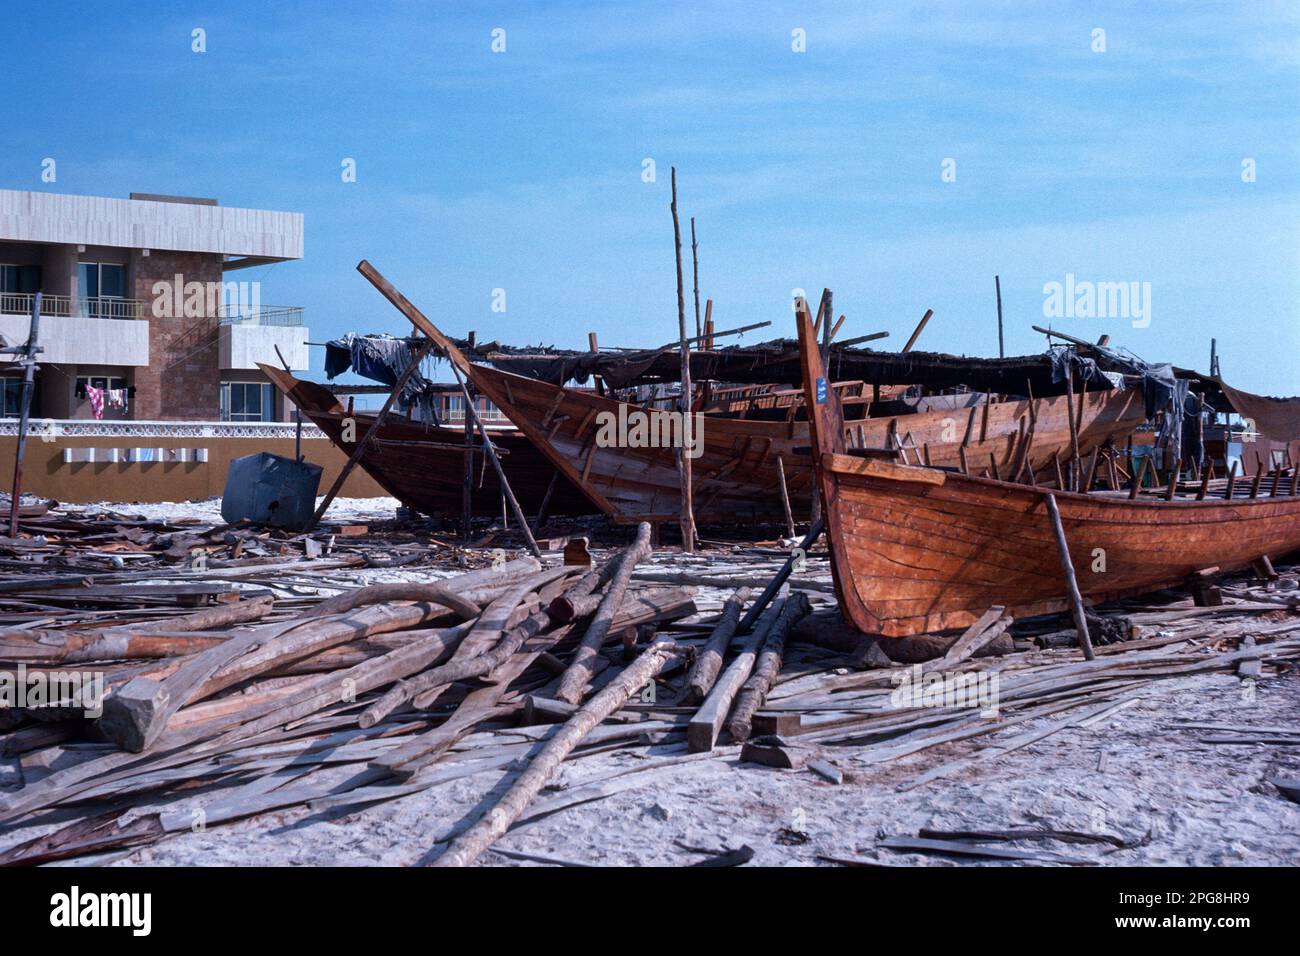 Abu Dhabi UAE 1976 – Dhow building yard at Al Bateen harbour (this area has now been redeveloped) in Abu Dhabi, United Arab Emirates Stock Photo